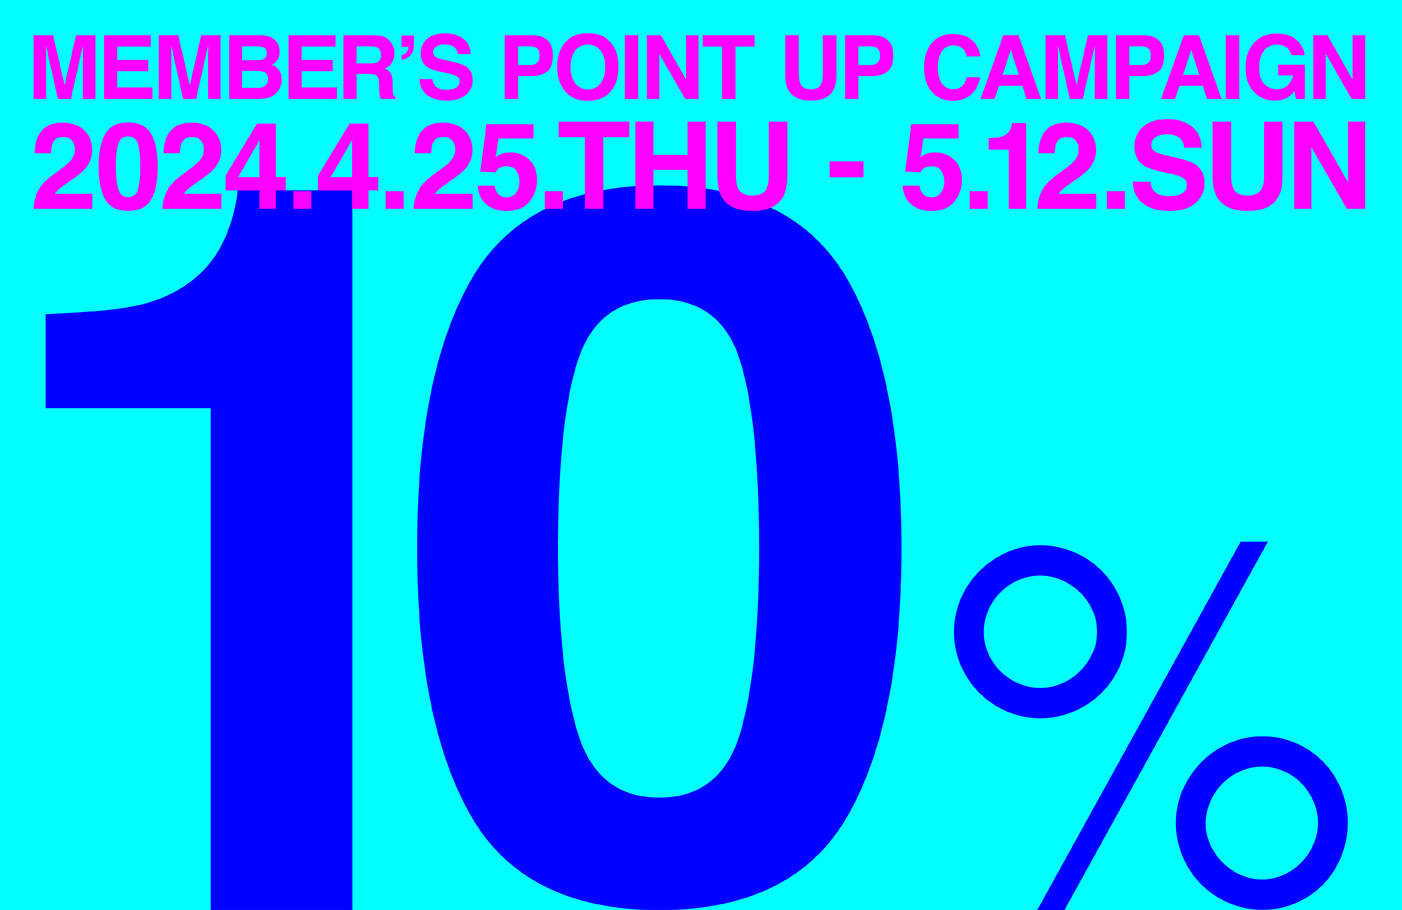 CIBONE MEMBER'S POINT UP CAMPAIGN＋10％